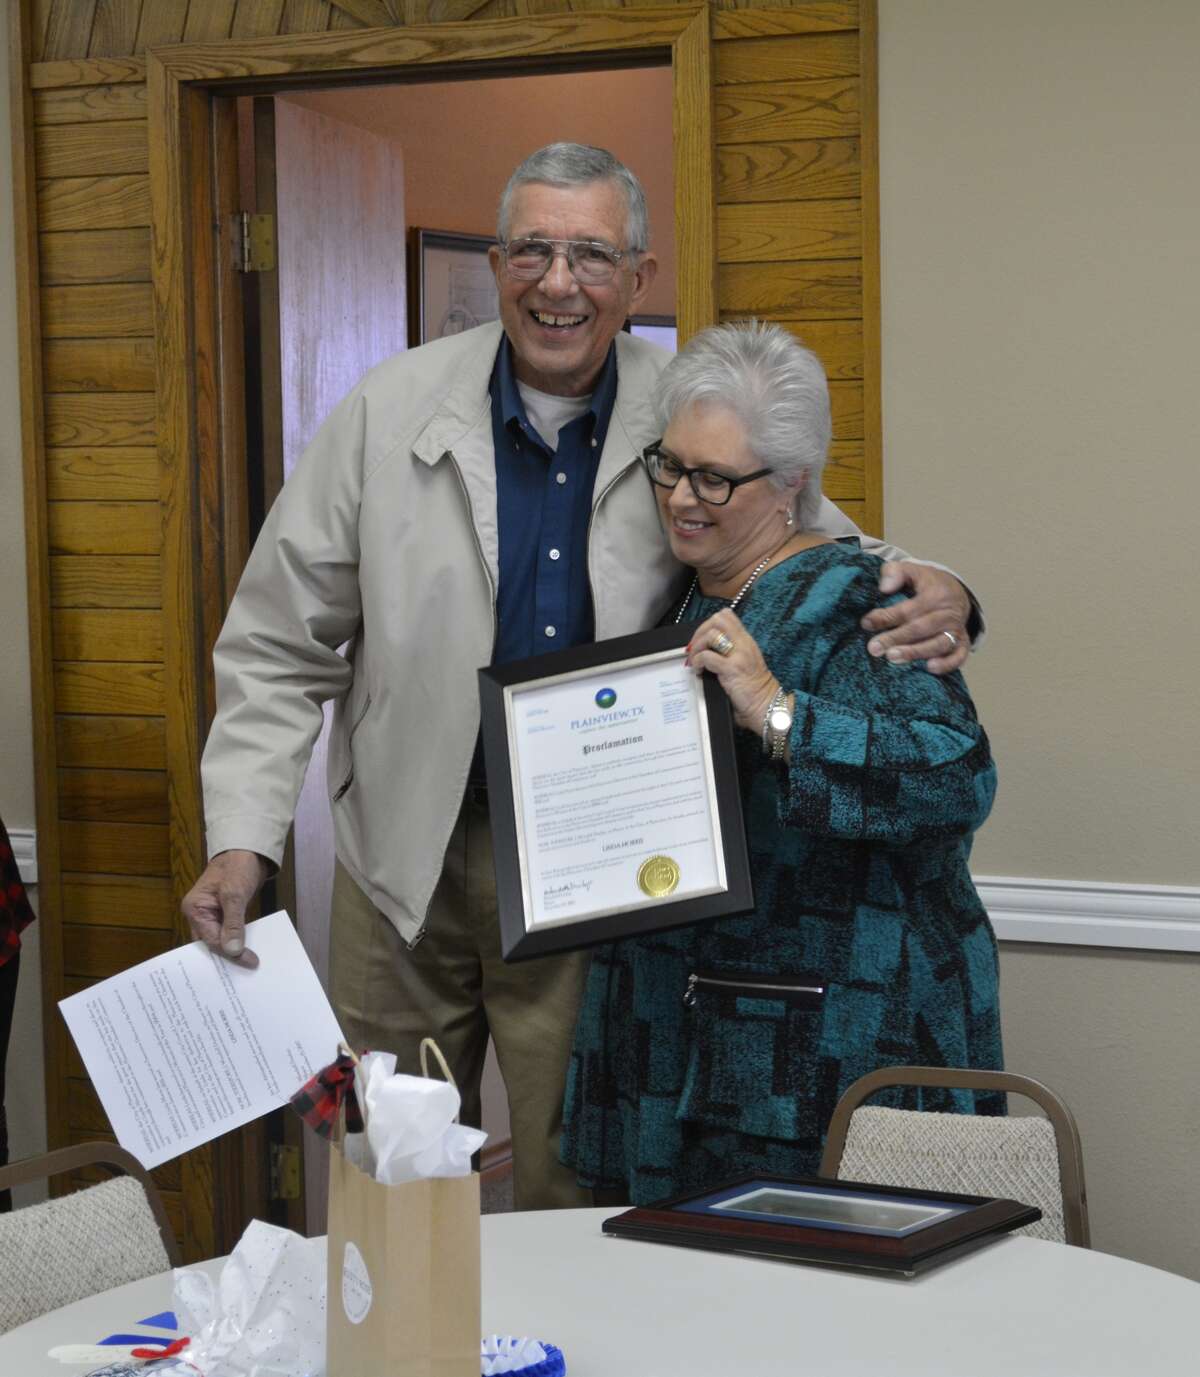 Plainview Mayor Wendell Dunlap presents Plainview Chamber Director Linda Morris with a proclamation honoring her for her years of service to the chamber during an open house event Friday. Morris is retiring as chamber director after nearly seven years at the helm of the organization.